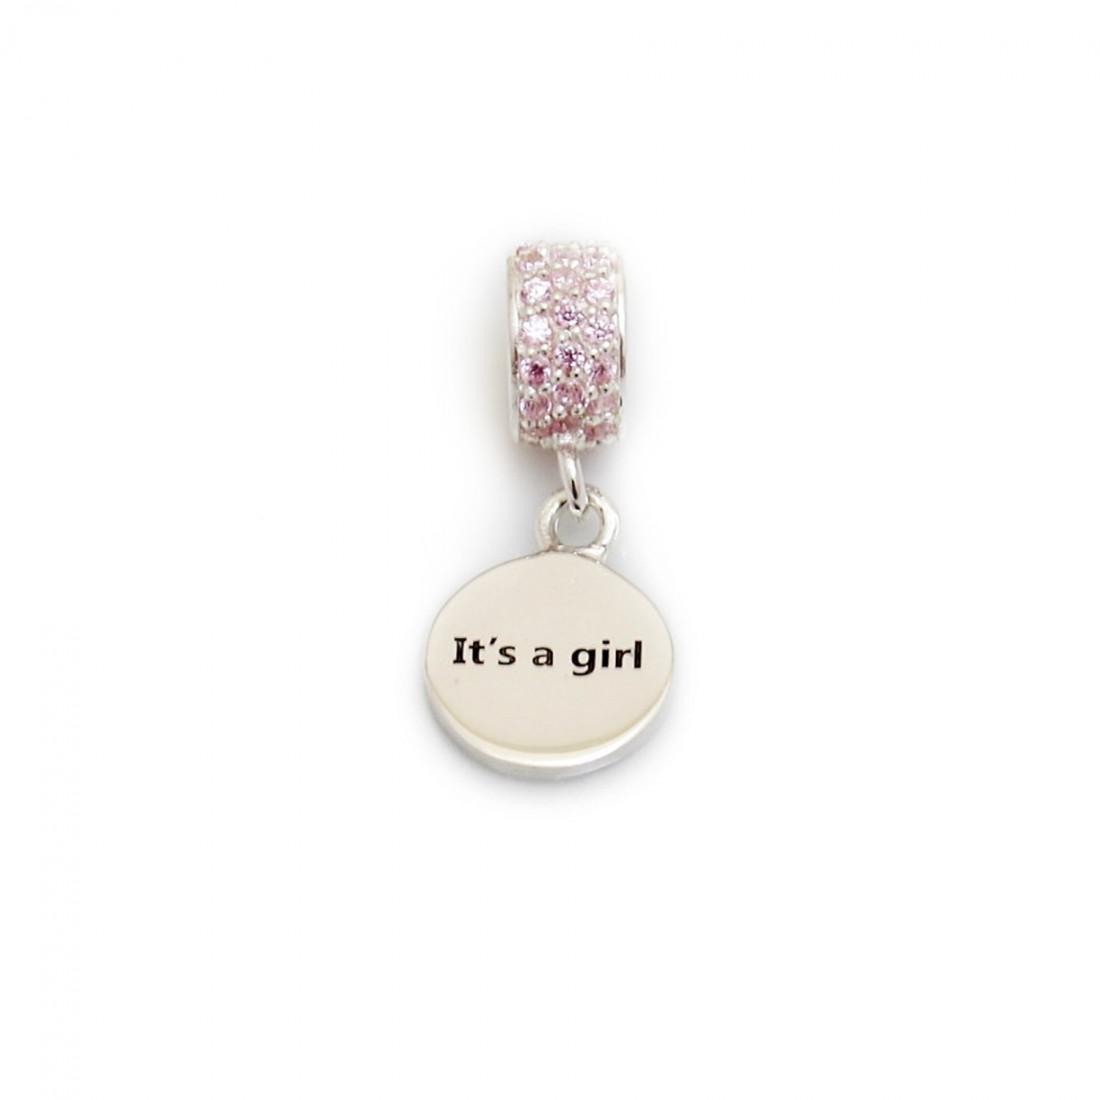 Exclusive Sterling Silver & Pink CZ 'It's A Girl' Roller Charm Bead